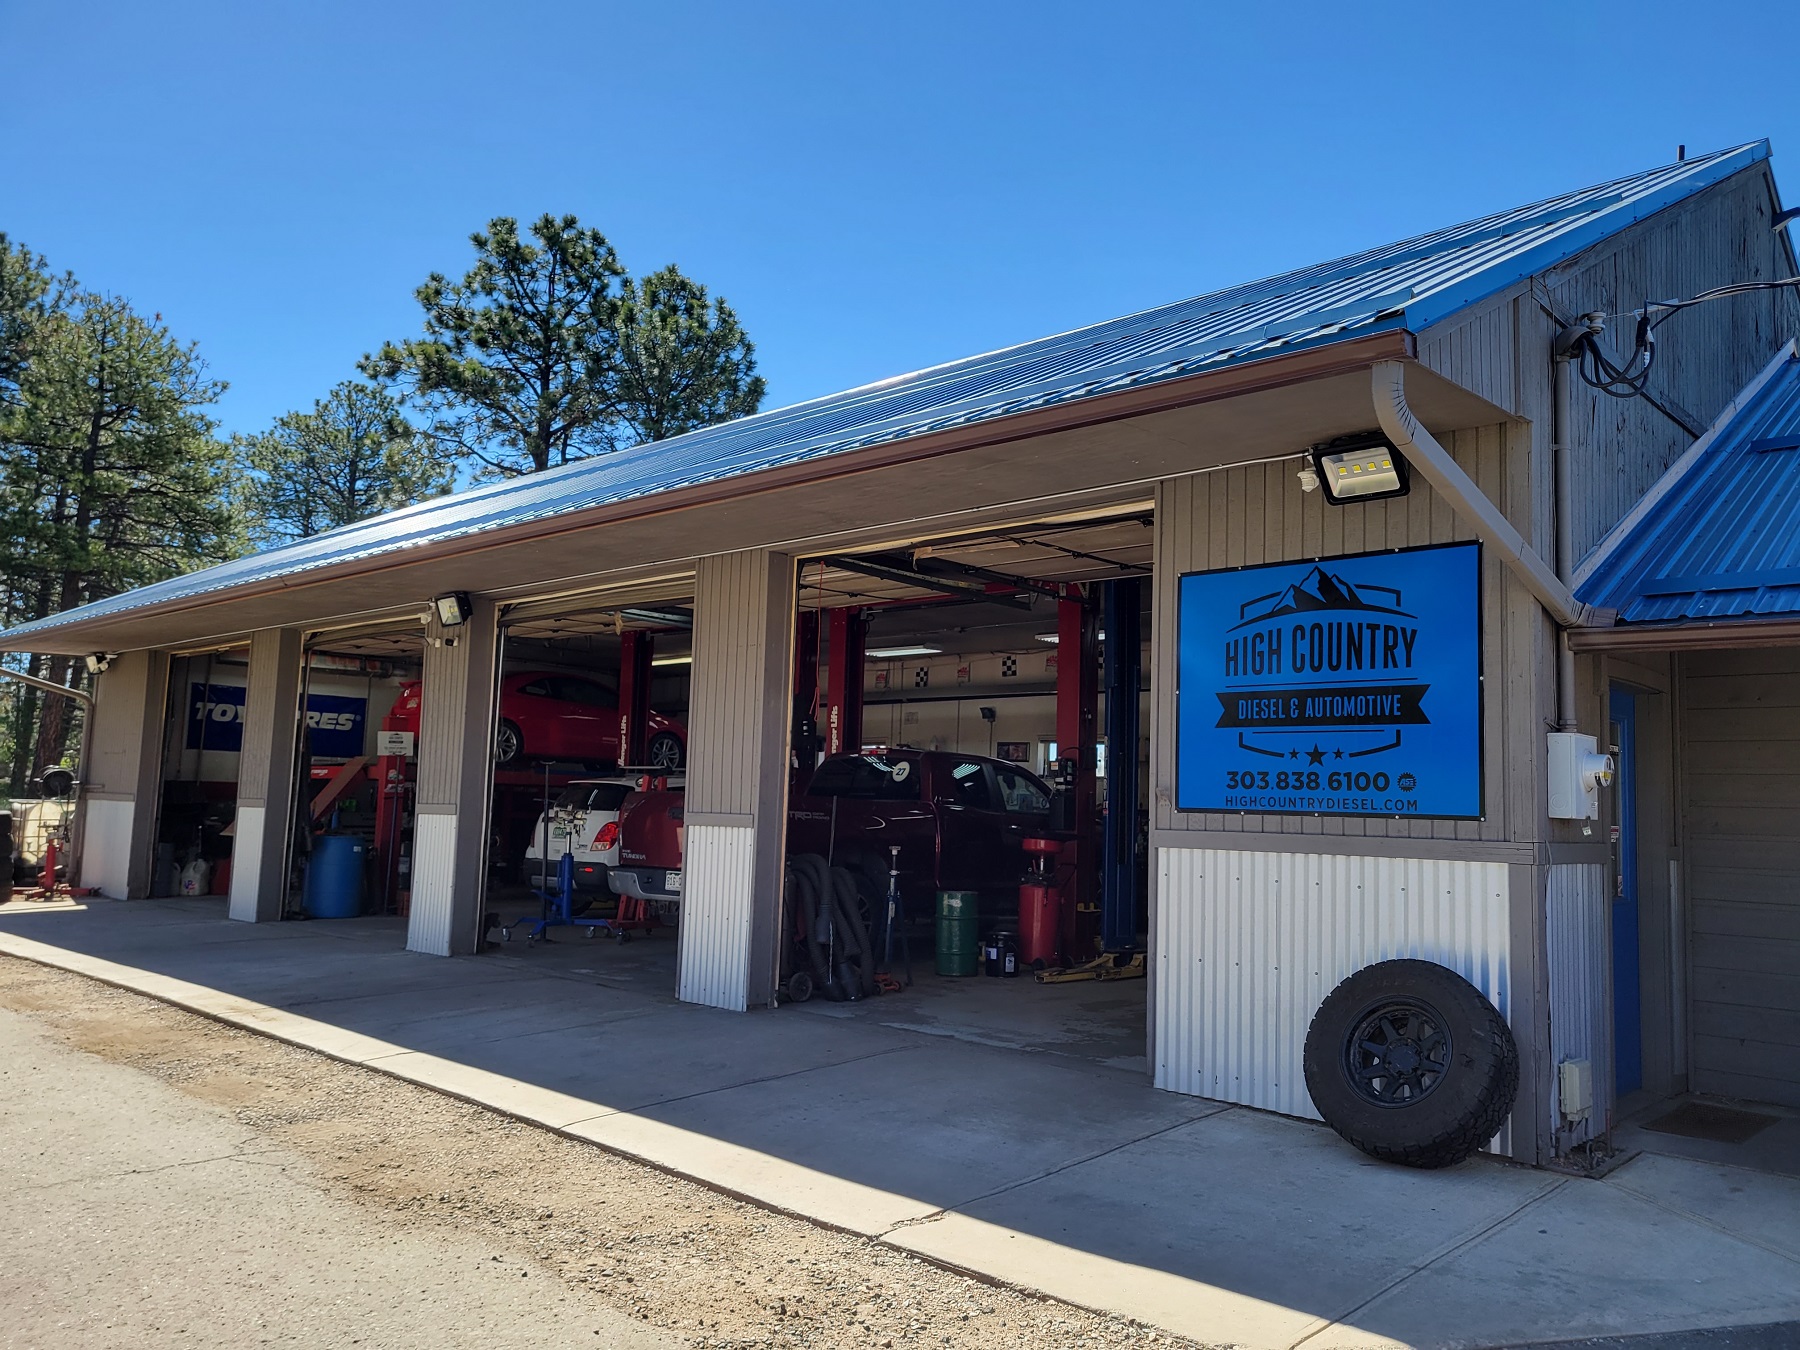 Automotive service bays open at High Country Diesel resized